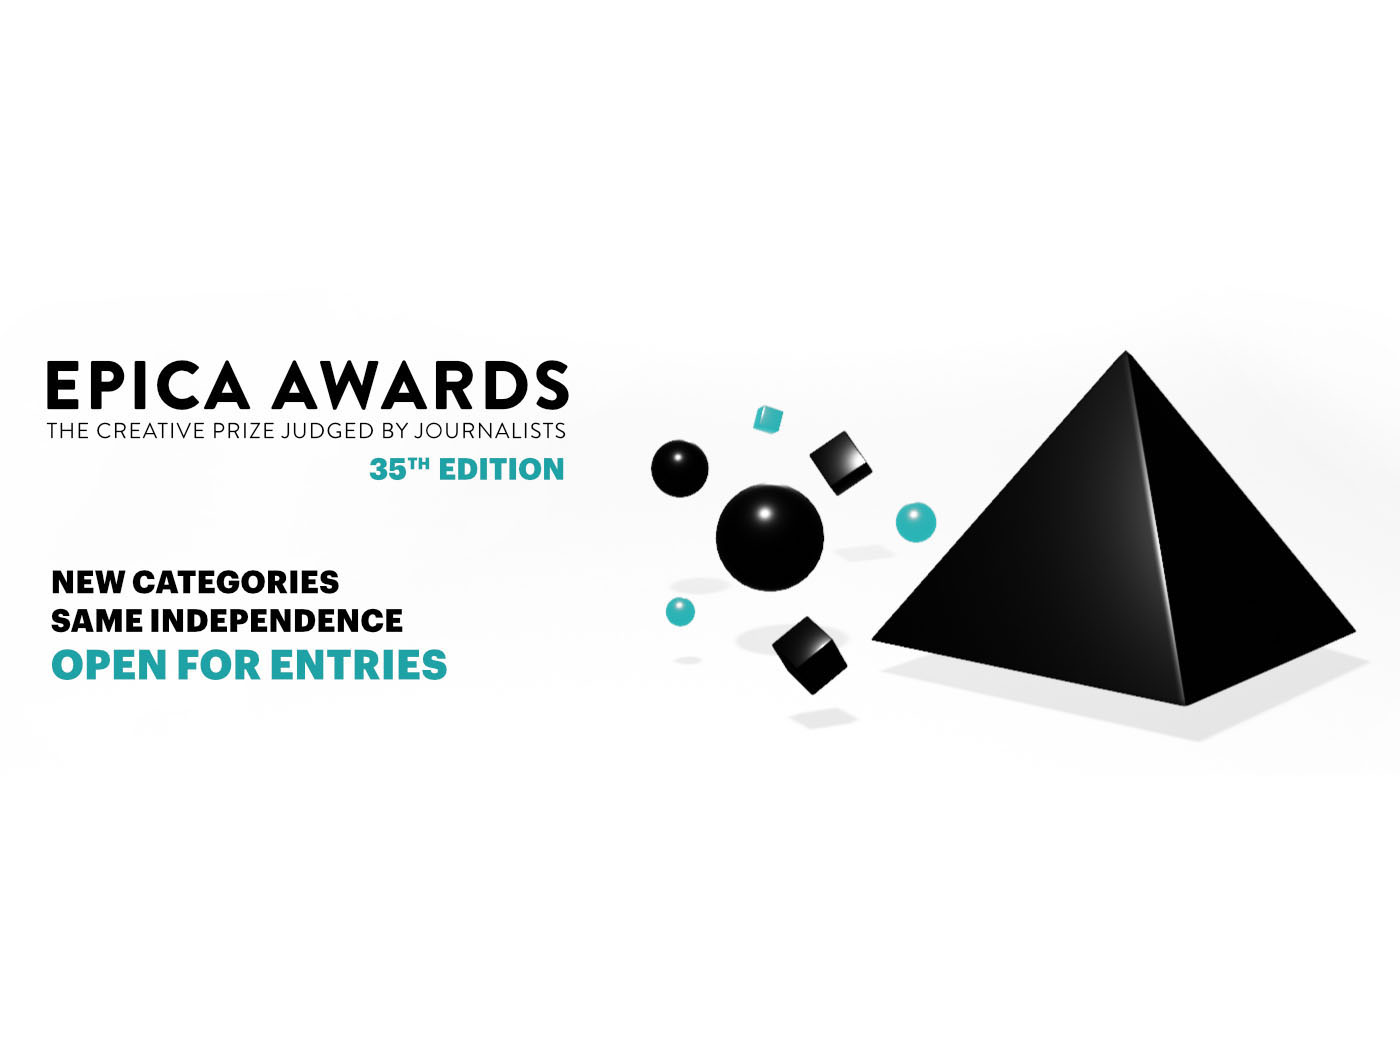 The Epica Awards 2022 are now open for early birds entries